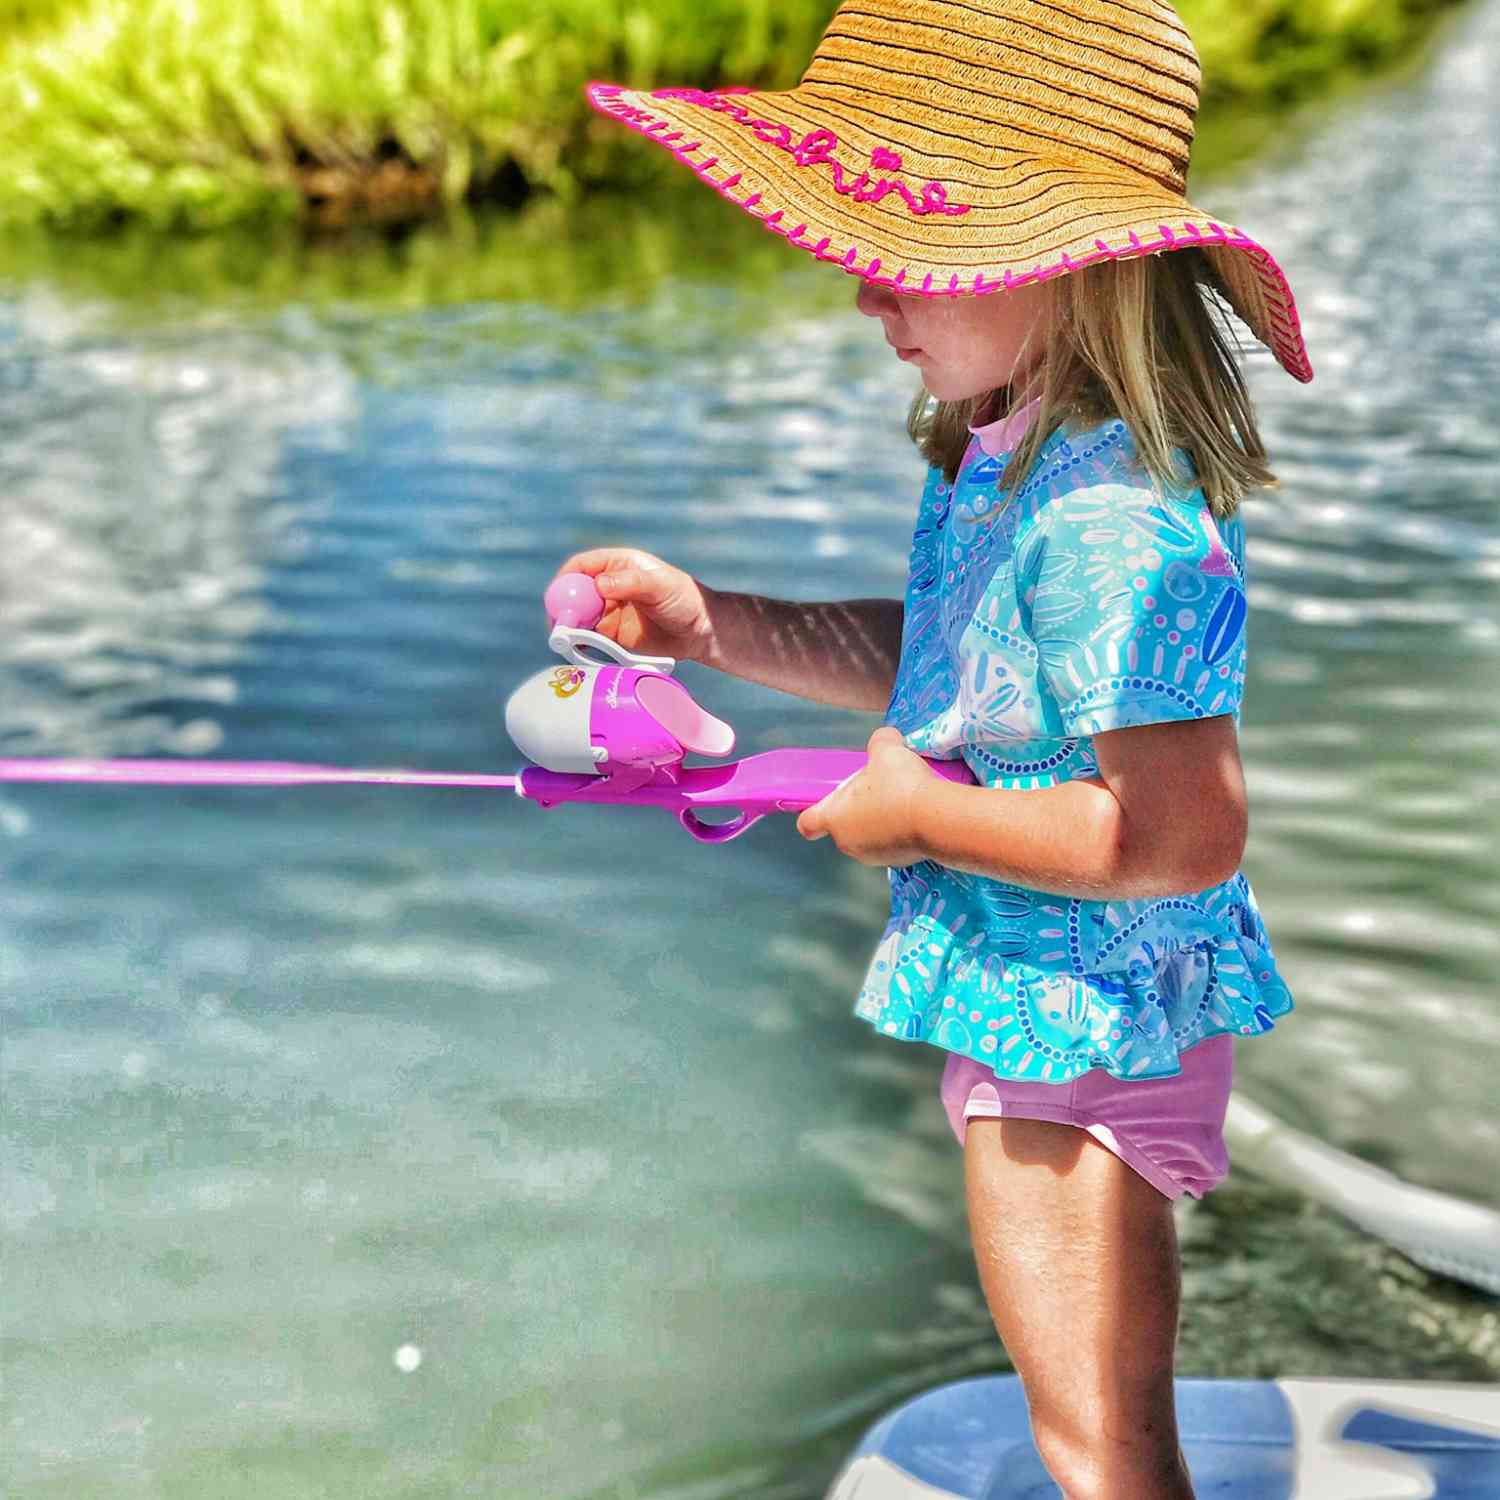 A 5 year old Little Girl who loves to out fish her daddy and brother with her pink fishing pole.